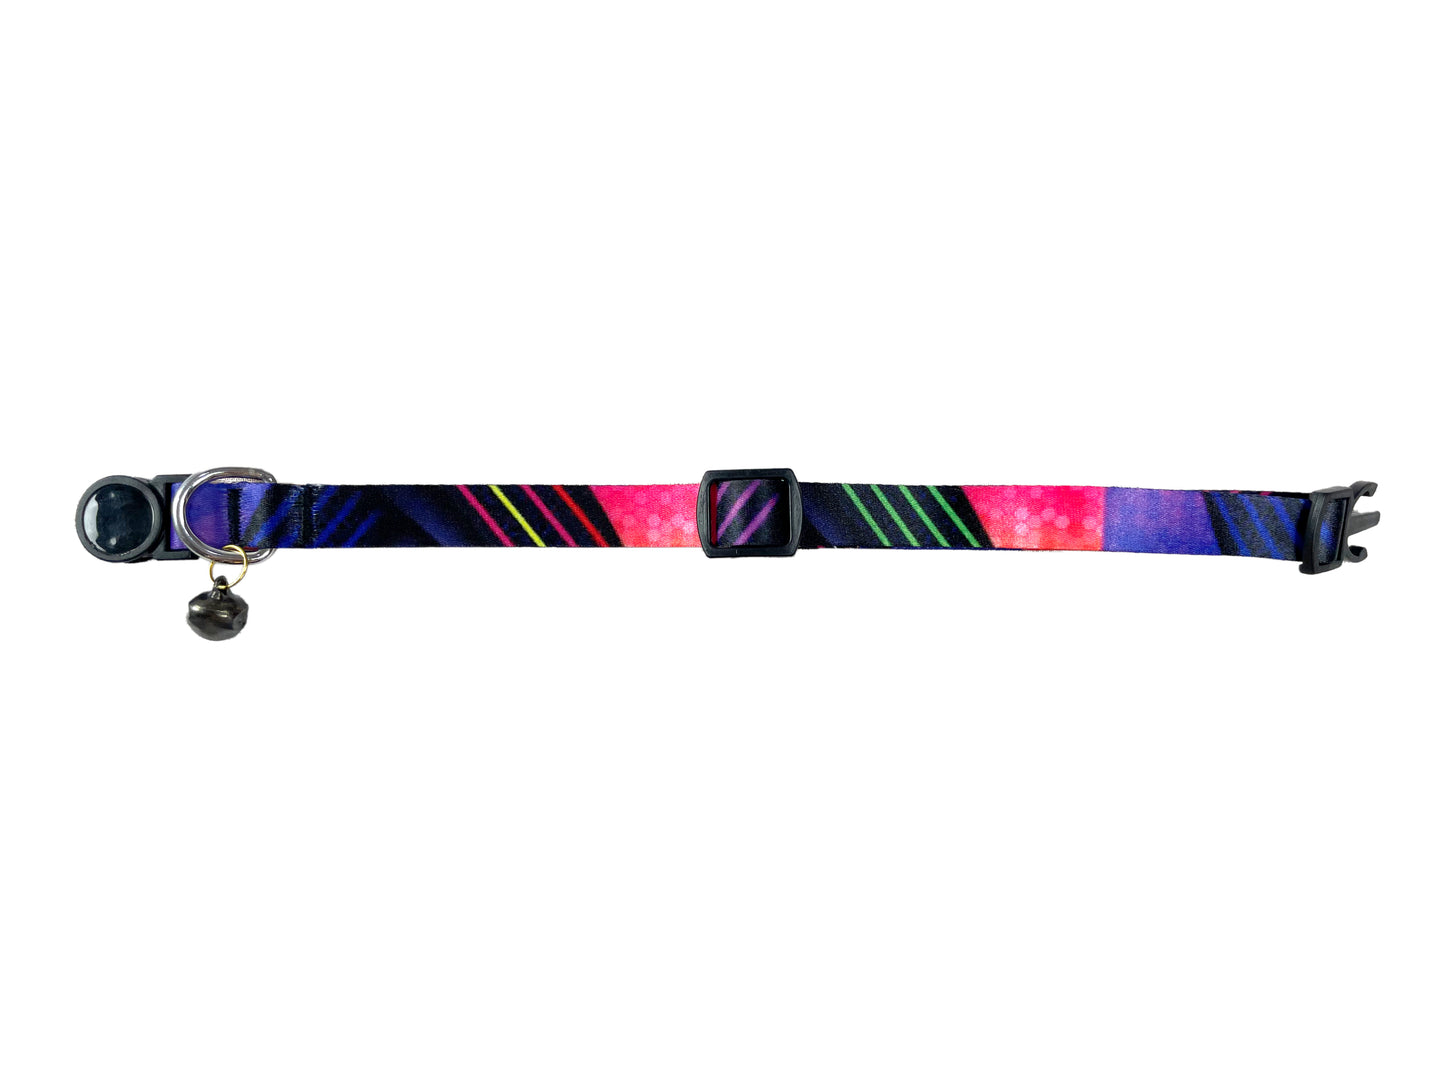 Tails Nation Digital Printed Galaxy Adjustable Collar For Your Cat